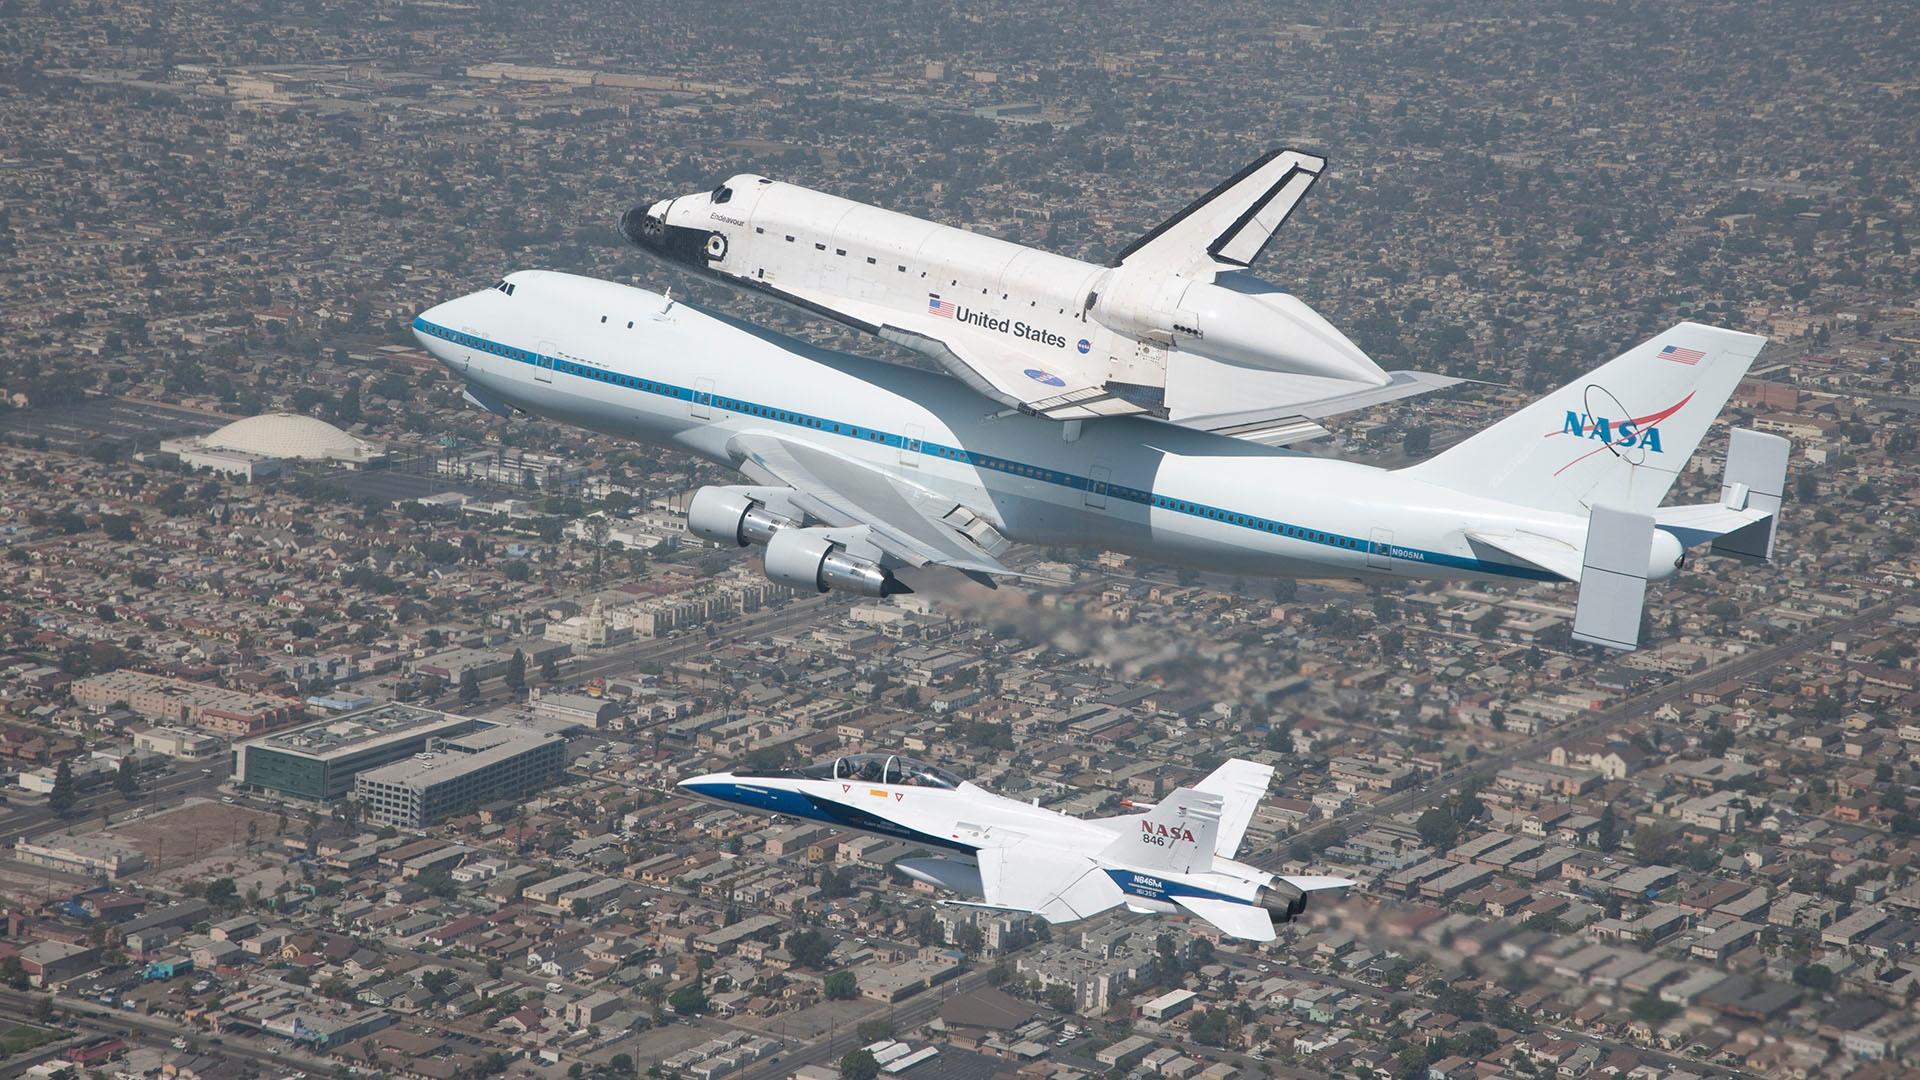 Space Shuttle Endeavour arrives to its final home in Los Angeles, c. 2012.